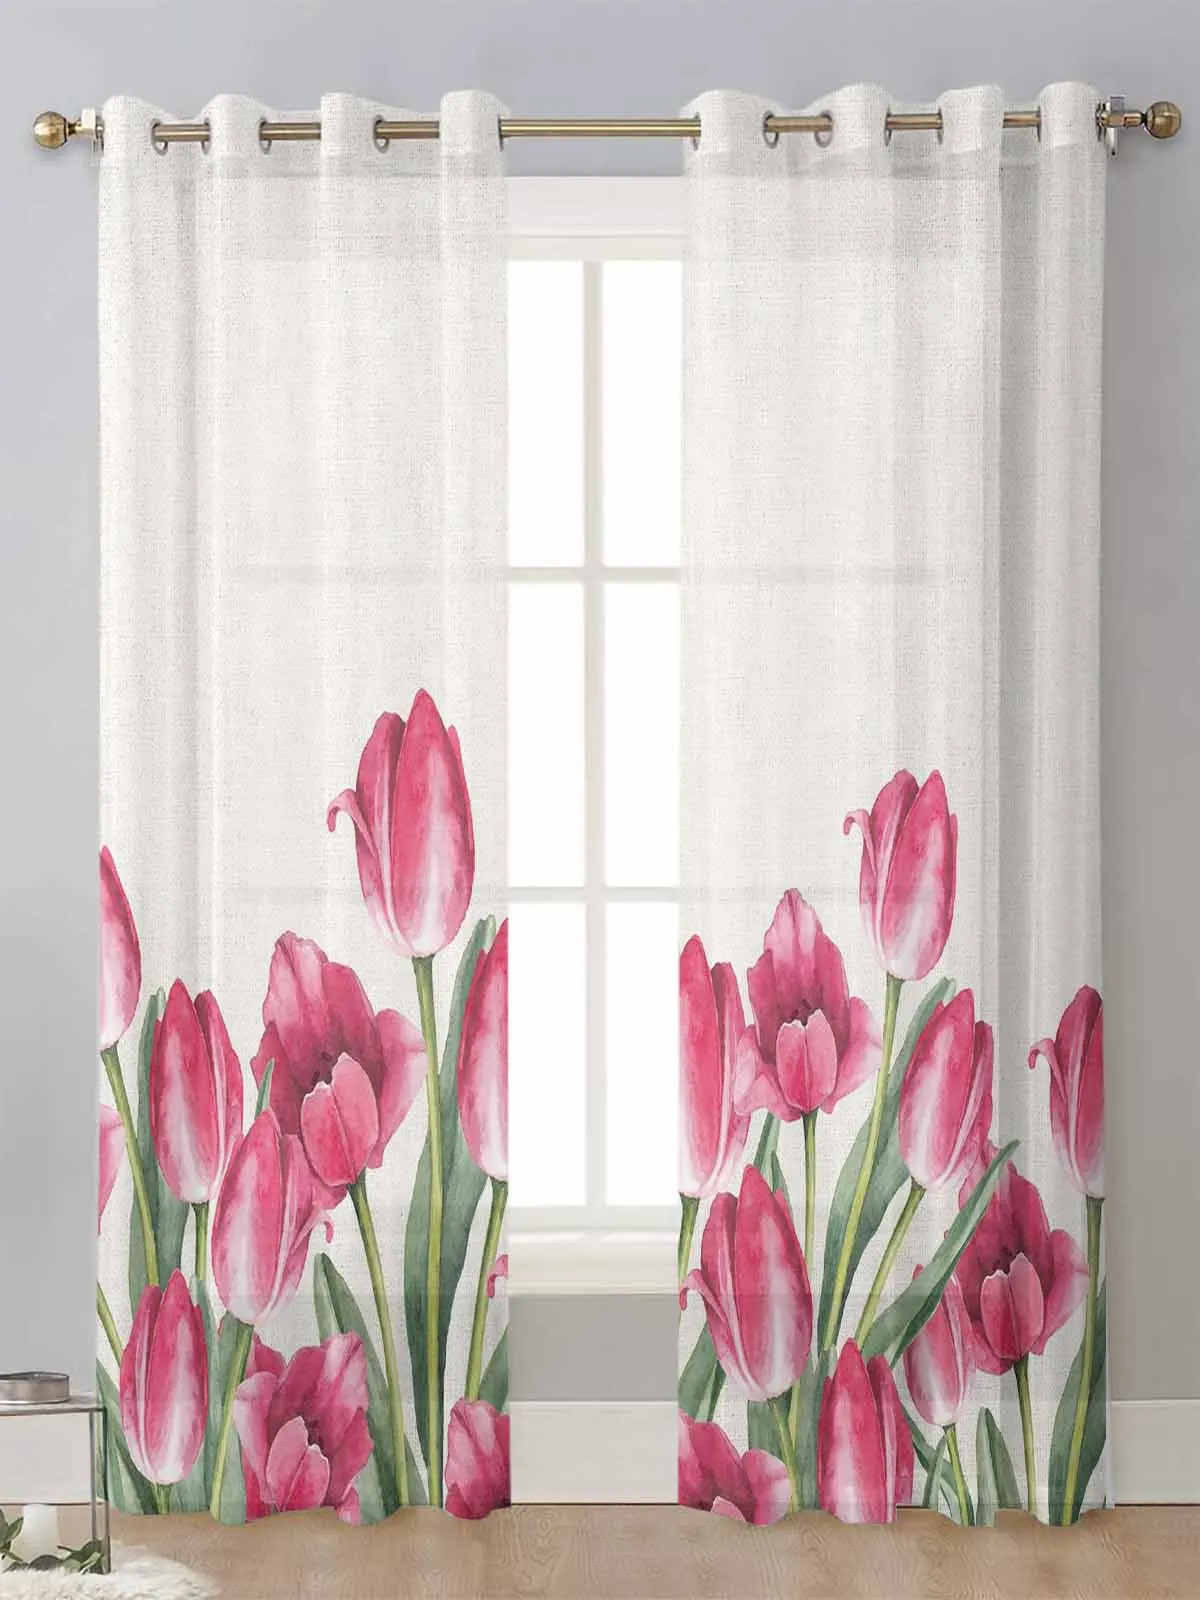 

Spring Watercolor Flower Tulip Sheer Curtains For Living Room Window Transparent Voile Tulle Curtain Cortinas Drapes Home Decor